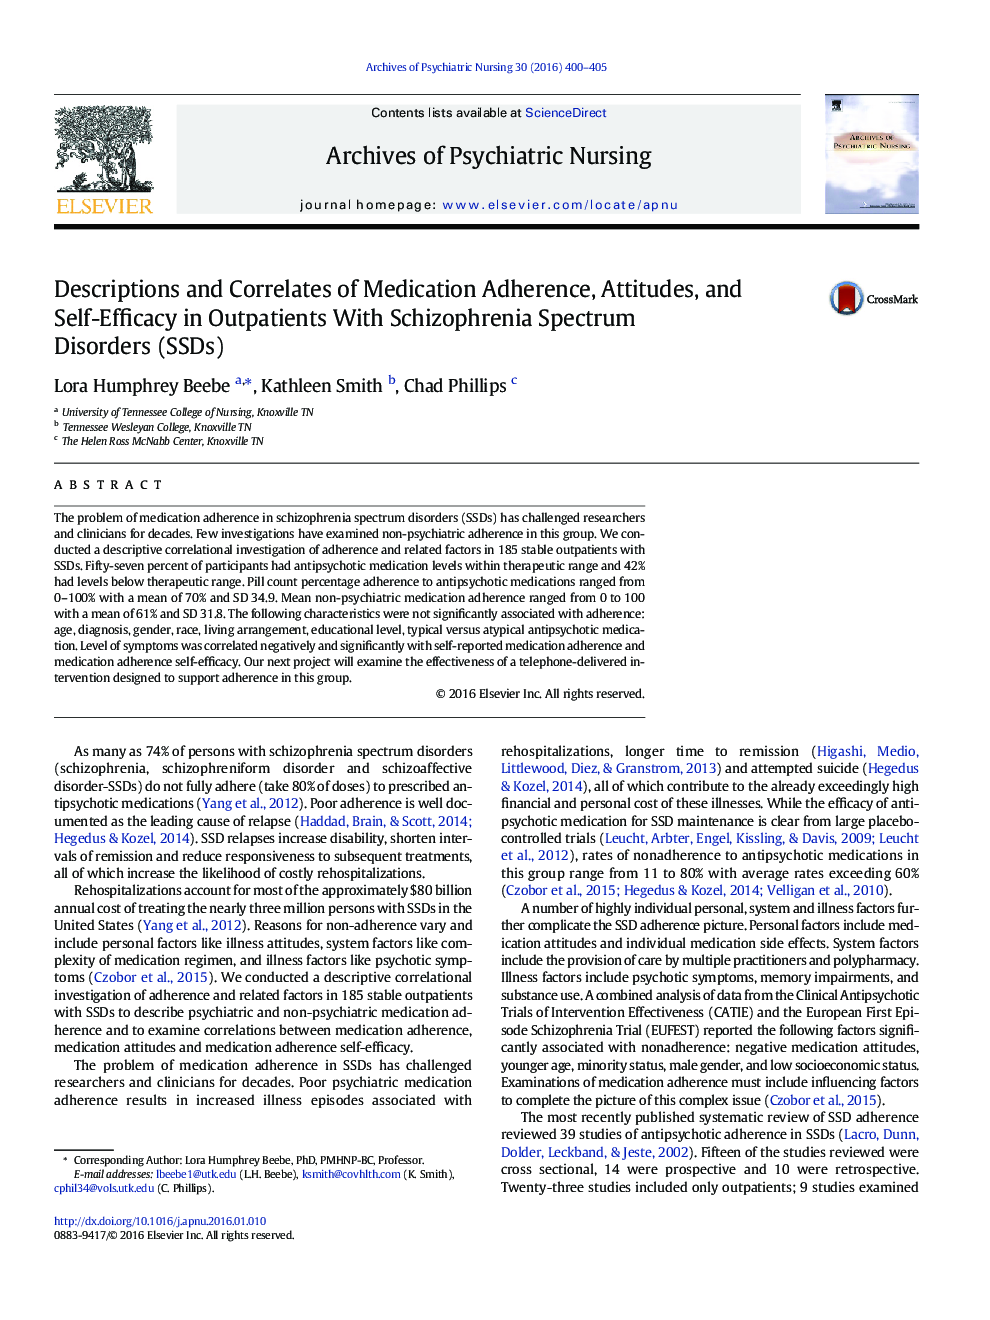 Descriptions and Correlates of Medication Adherence, Attitudes, and Self-Efficacy in Outpatients With Schizophrenia Spectrum Disorders (SSDs)